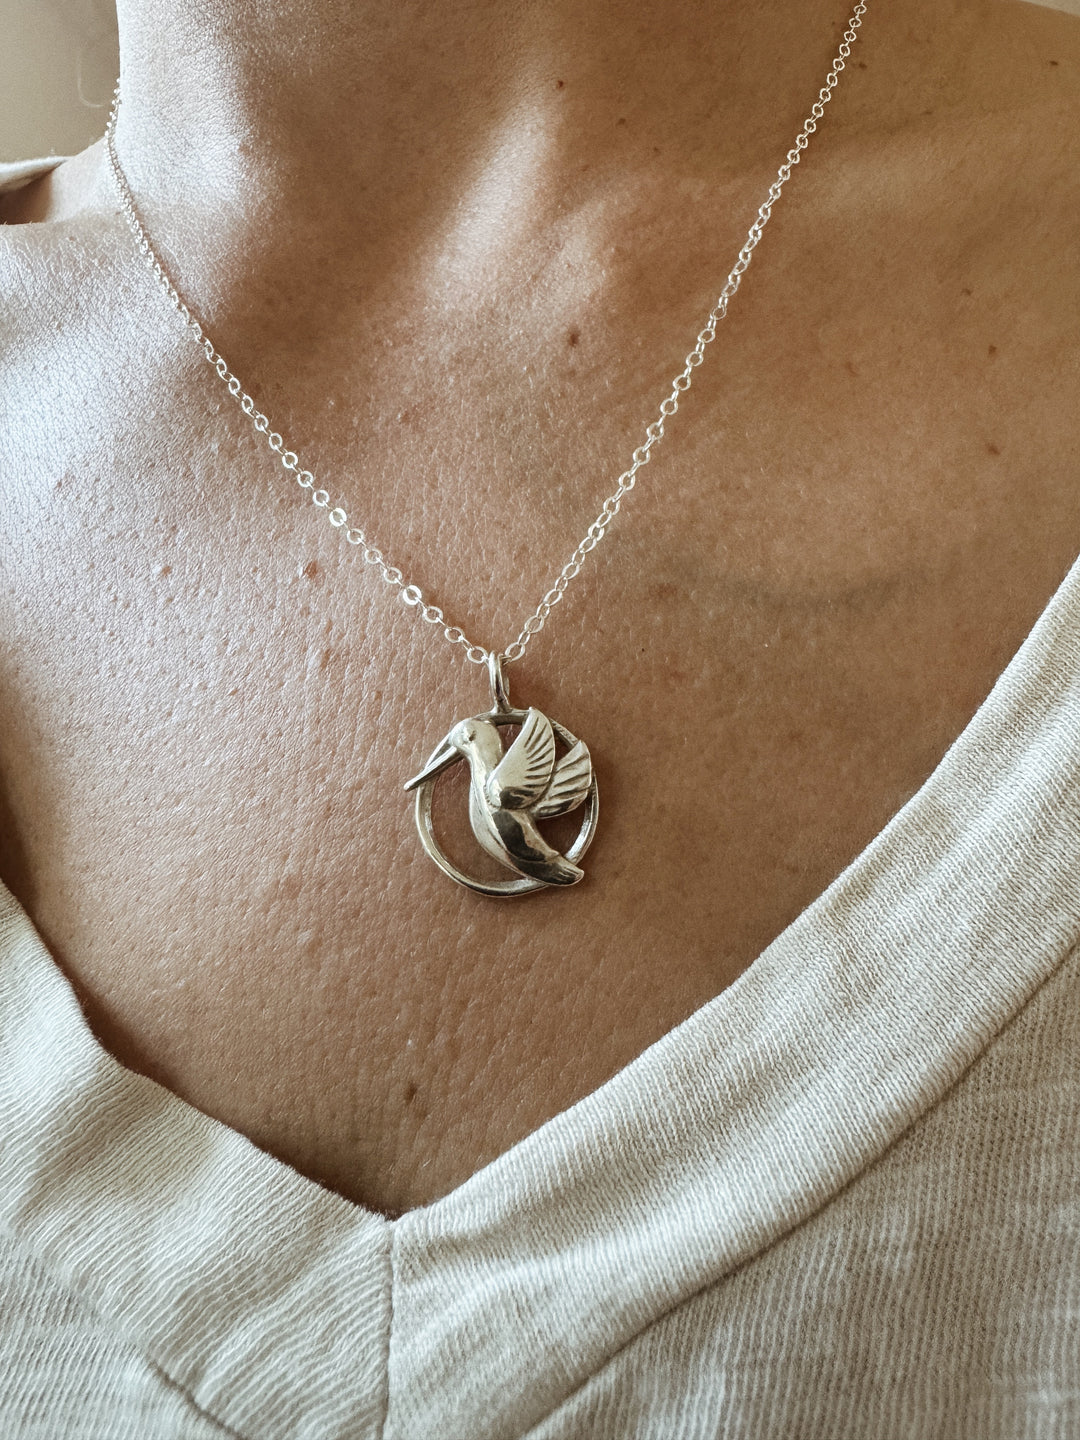 Woman Wears the MIMOSA Handcrafted Hummingbird Pendant in Sterling Silver